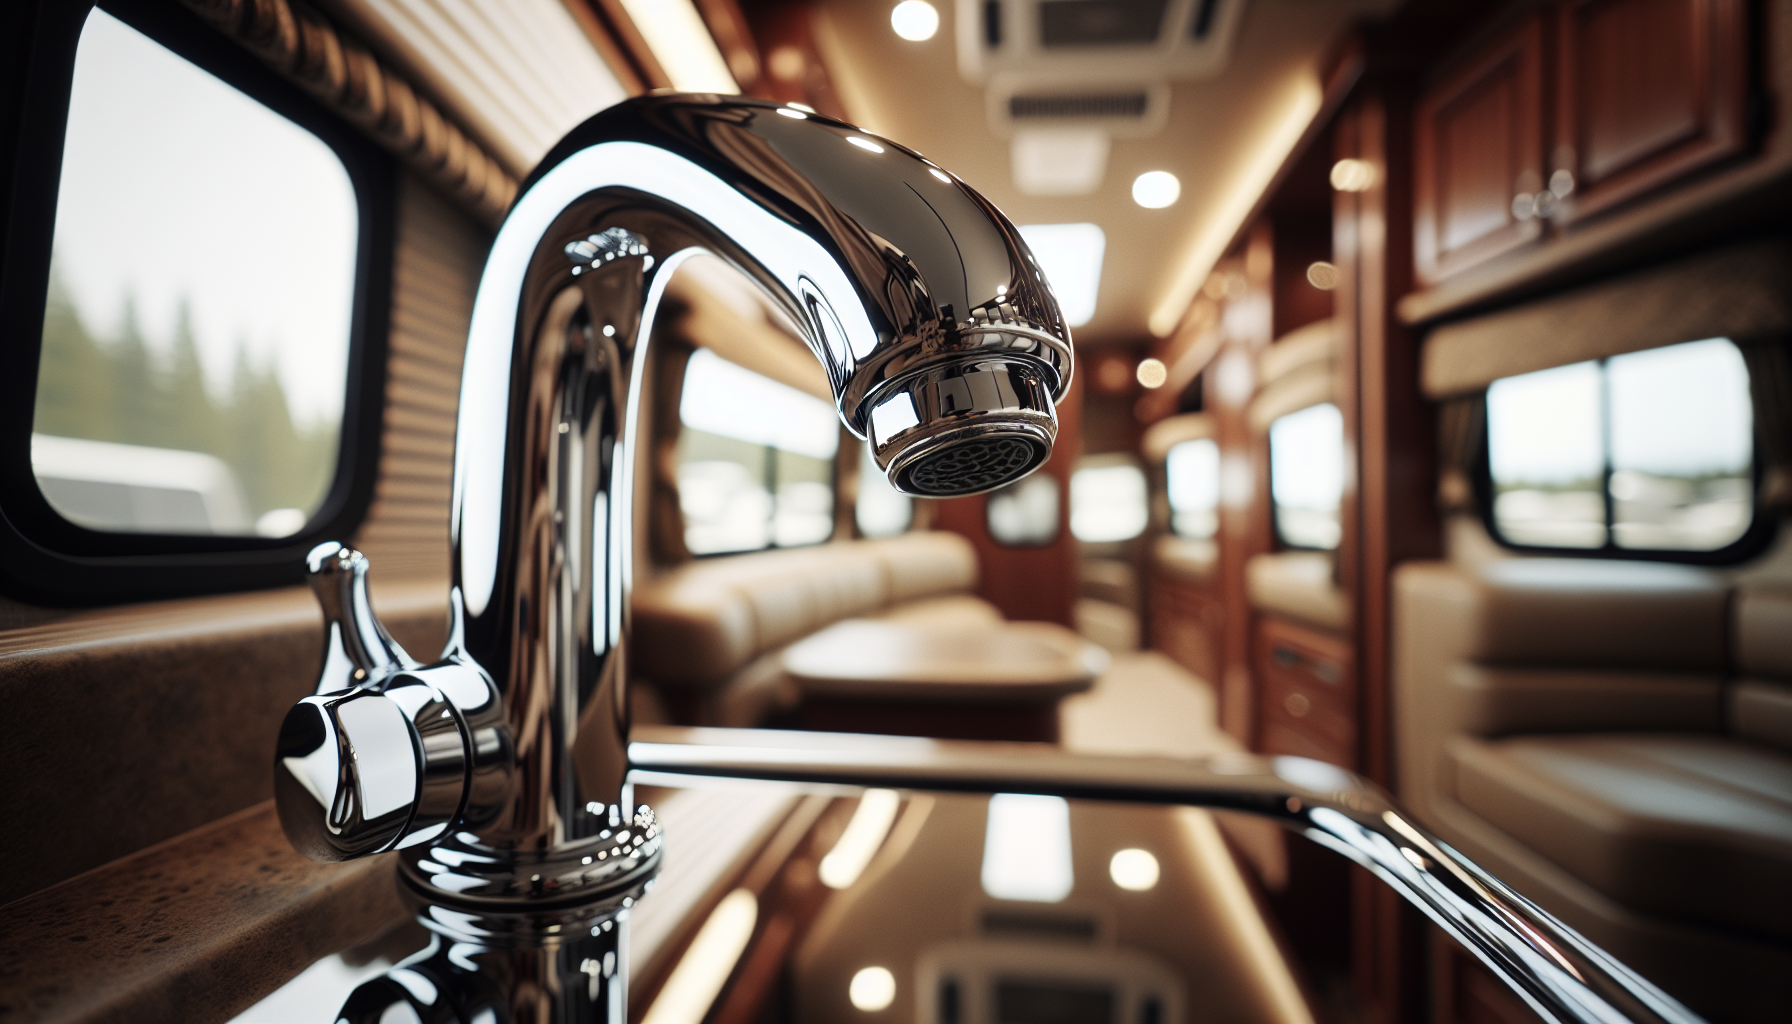 Which RV Manufacturer Has The Best Quality?